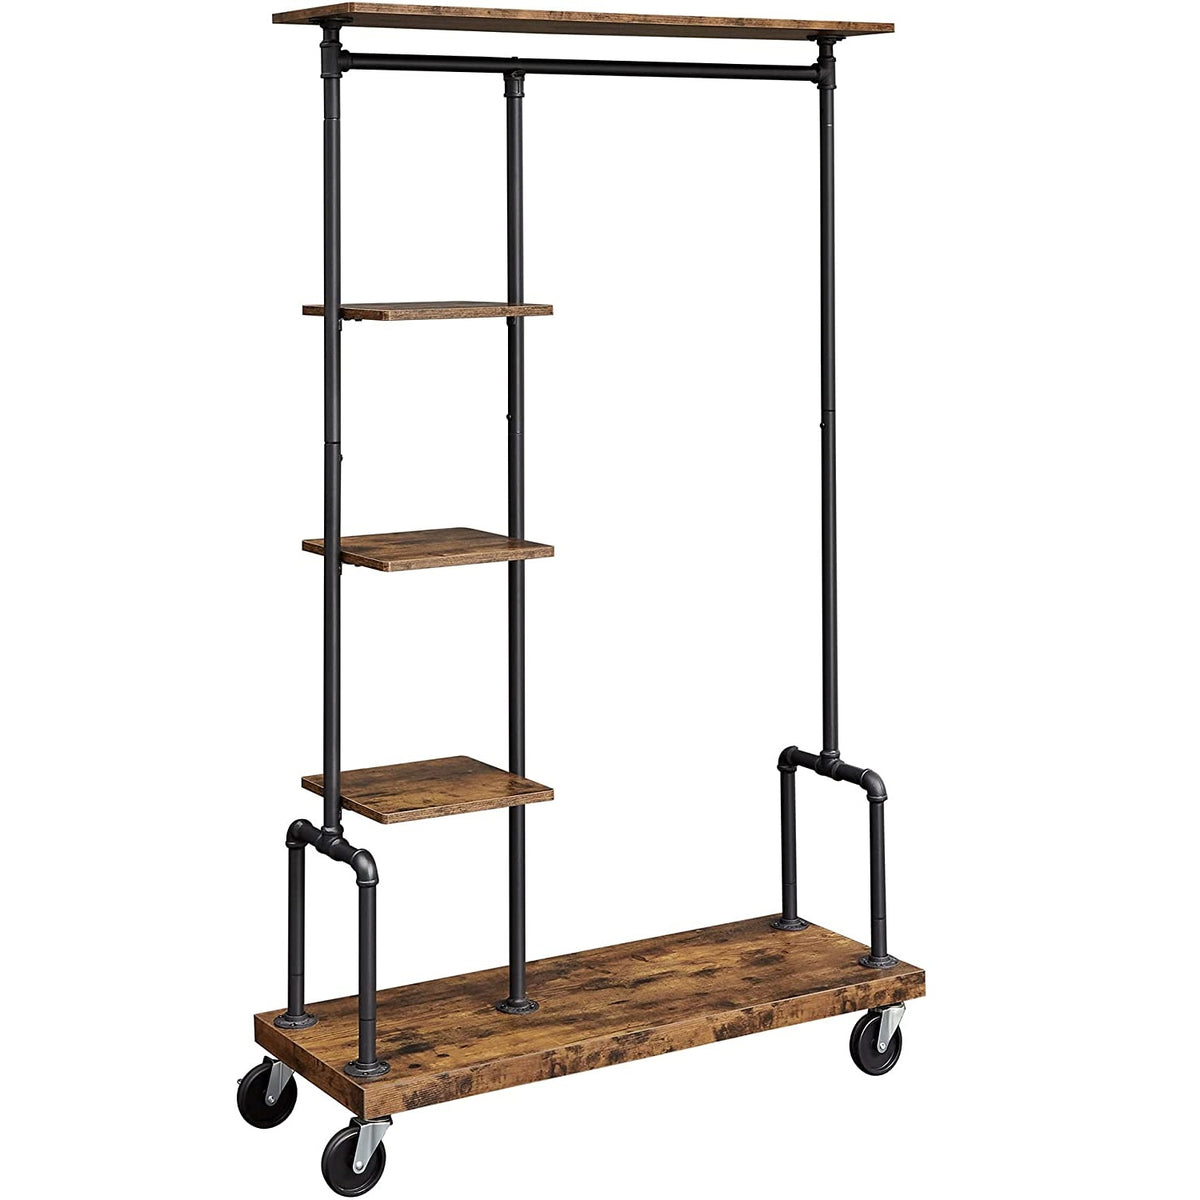 Lecoi 5-Tier Clothing Rack - Rustic Brown - Notbrand